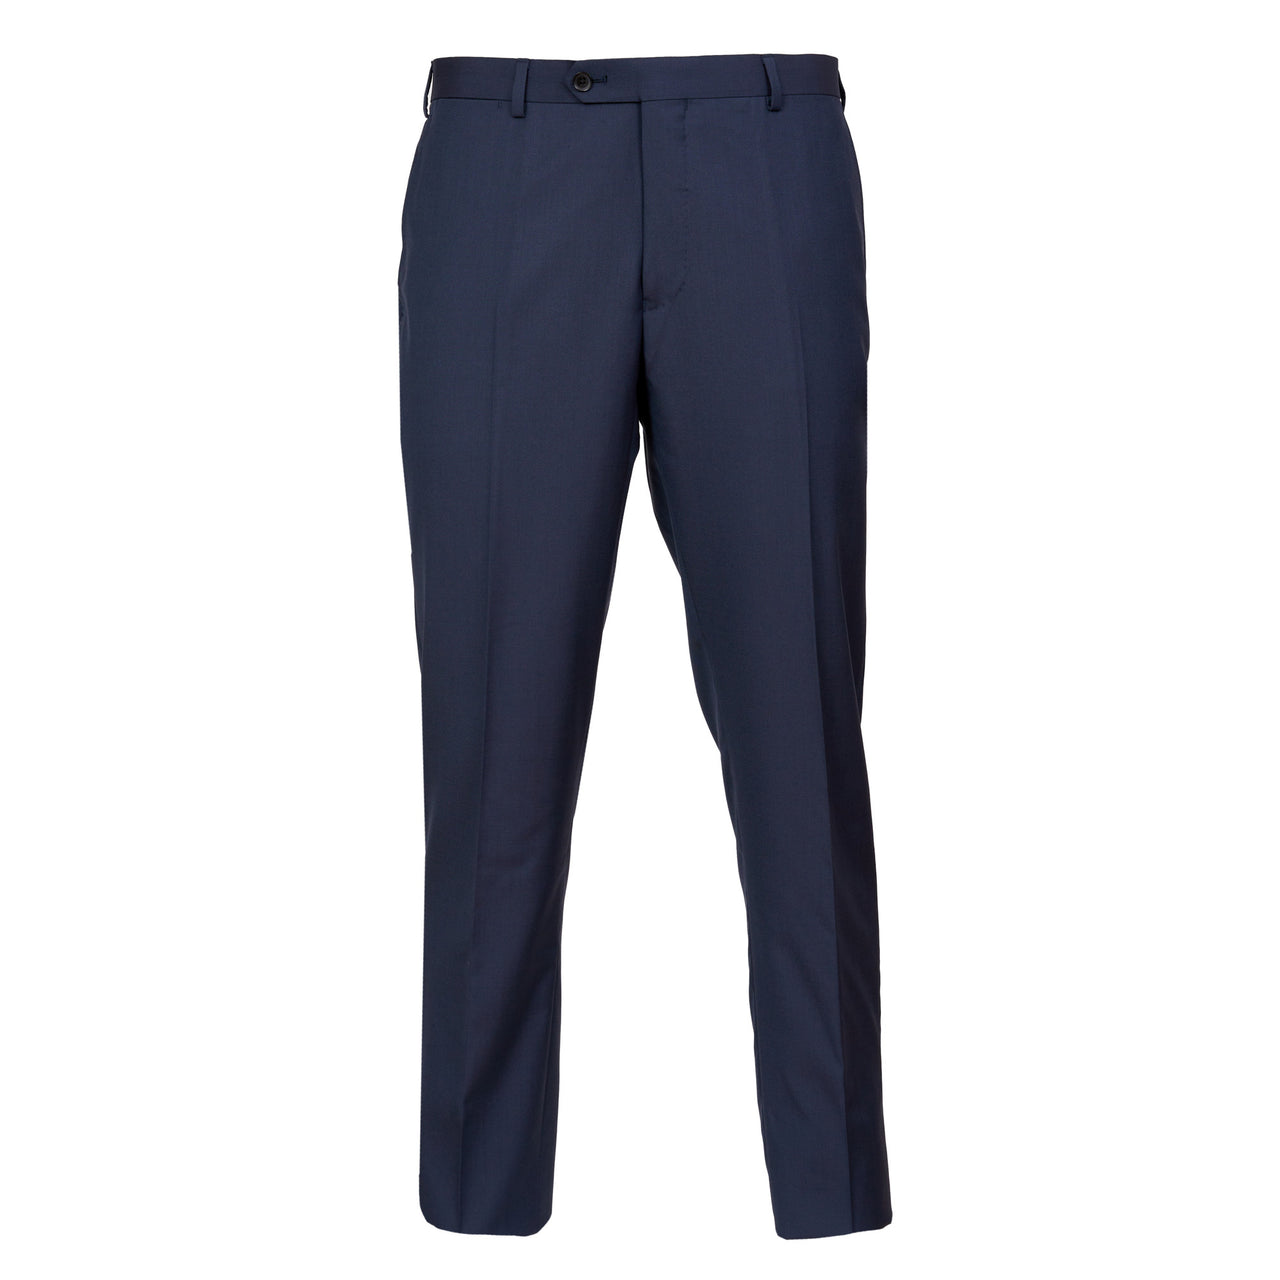 HENRY SARTORIAL Flat Front Wool Trousers FRENCH BLUE REG